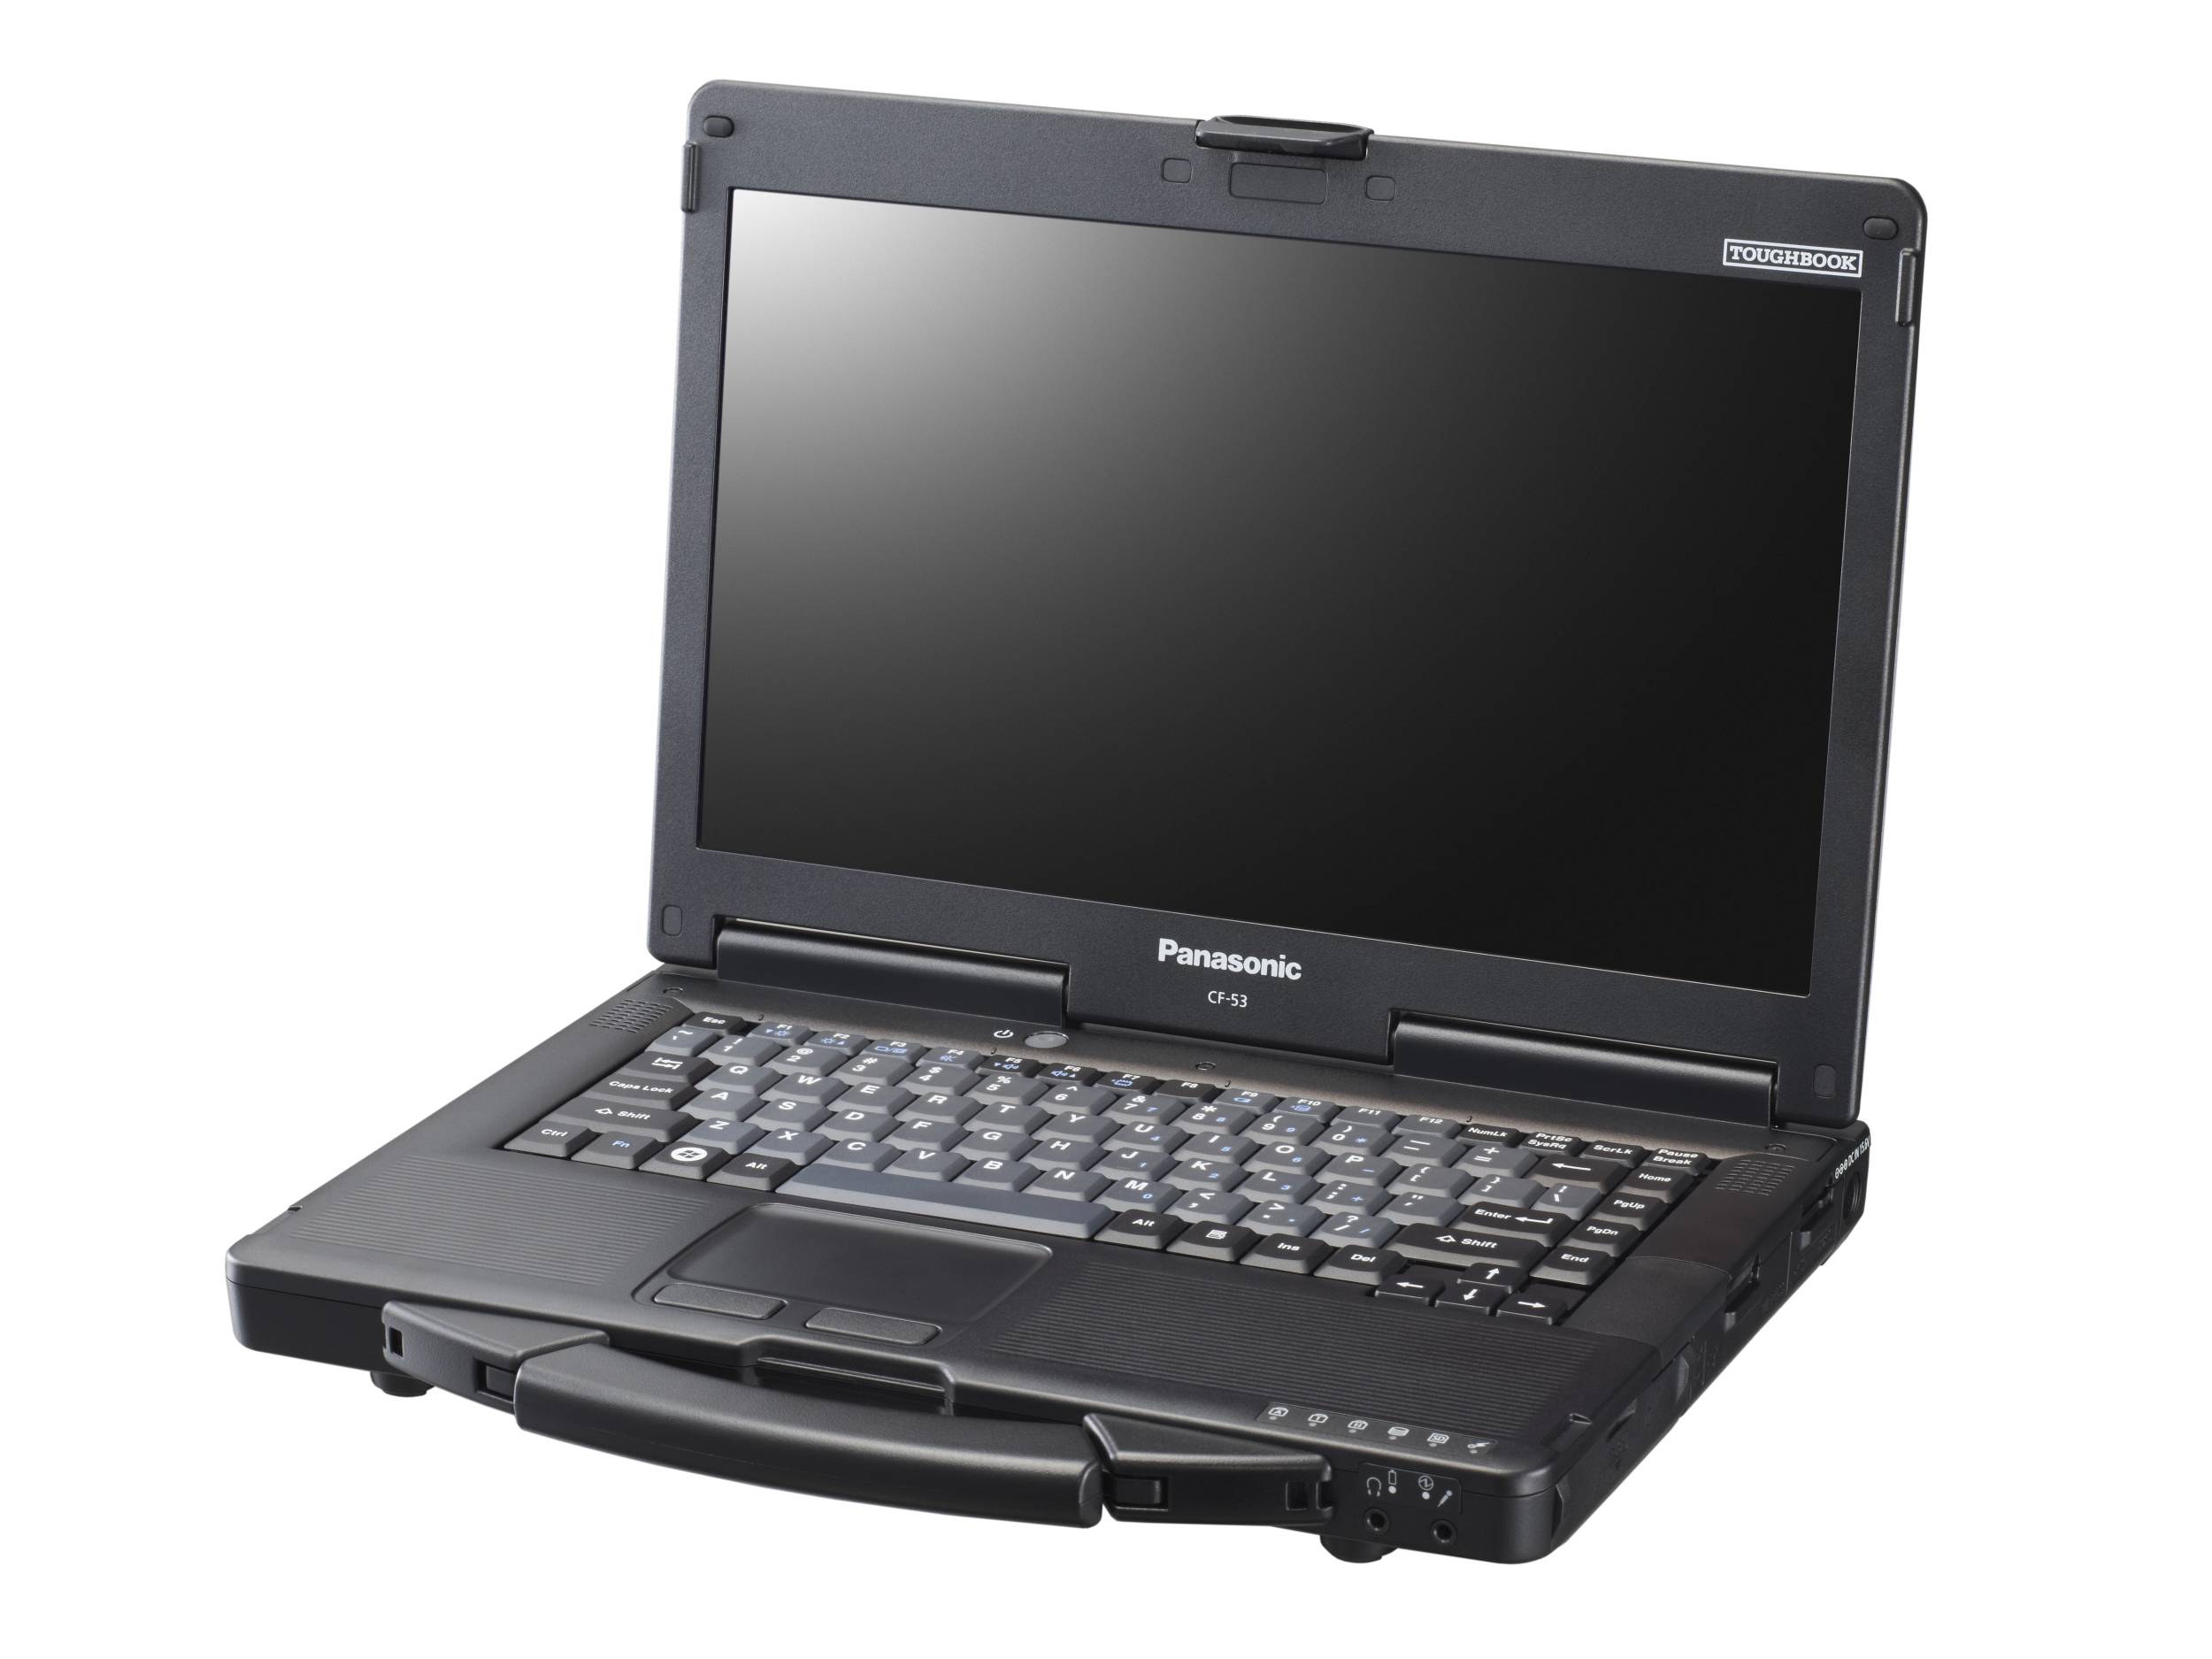 Used Panasonic A Grade CF-53 Toughbook 14-inch (High Definition-720p LED 1366 x 768) 2.5GHz Core i5 320GB HD 4 GB Memory CD Drive Win 7 Pro OS Power Adapter Included - image 2 of 3